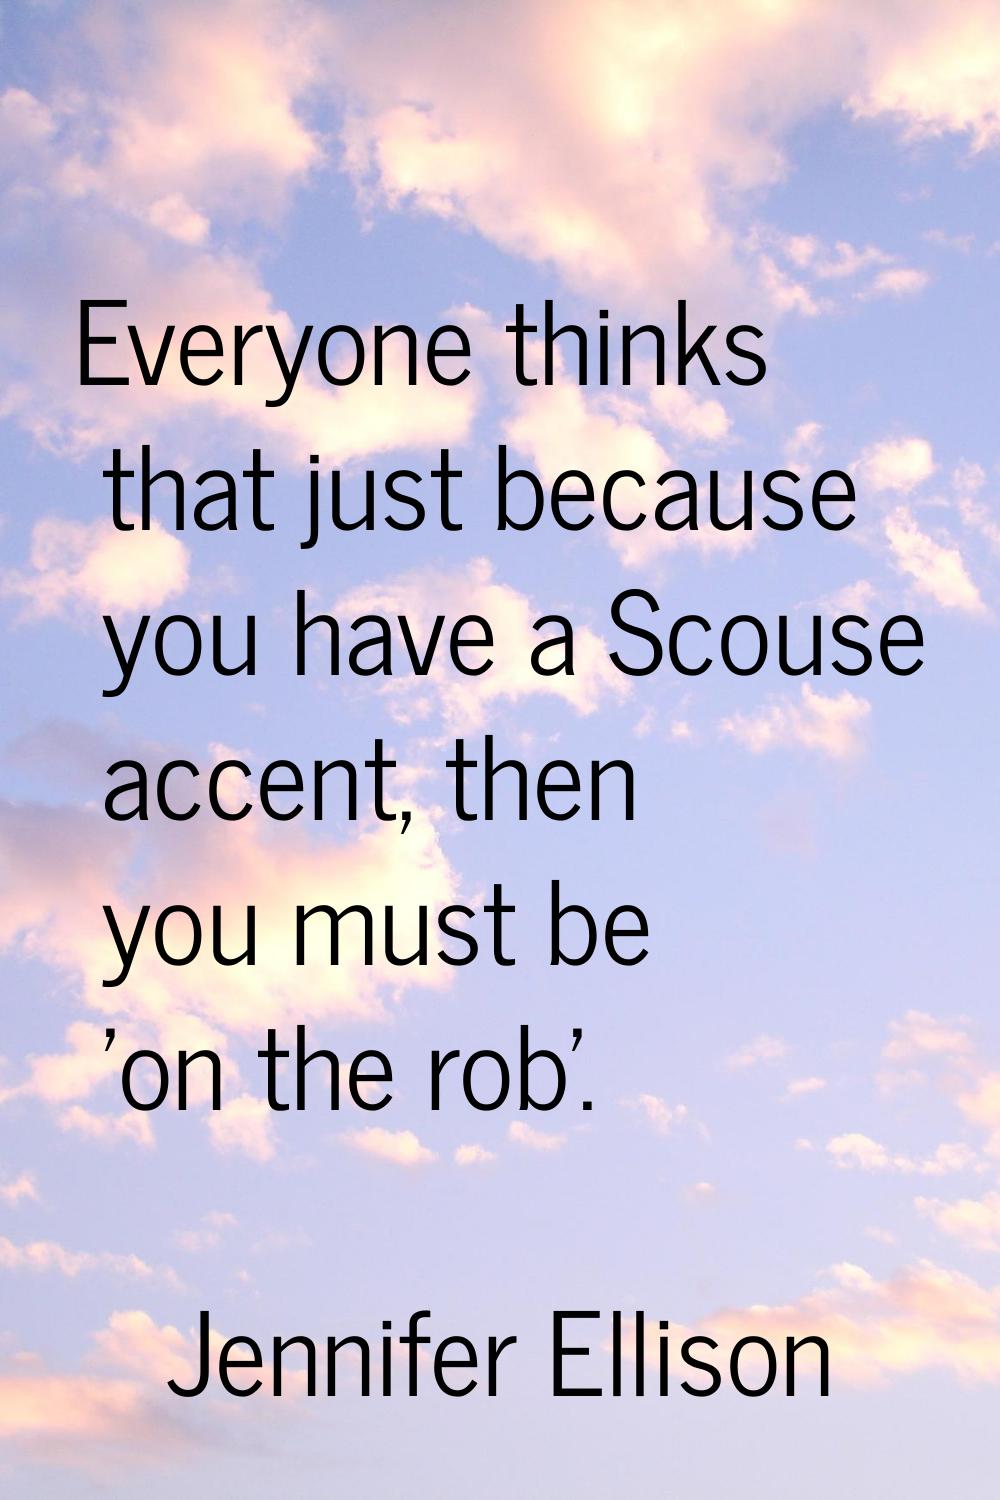 Everyone thinks that just because you have a Scouse accent, then you must be 'on the rob'.